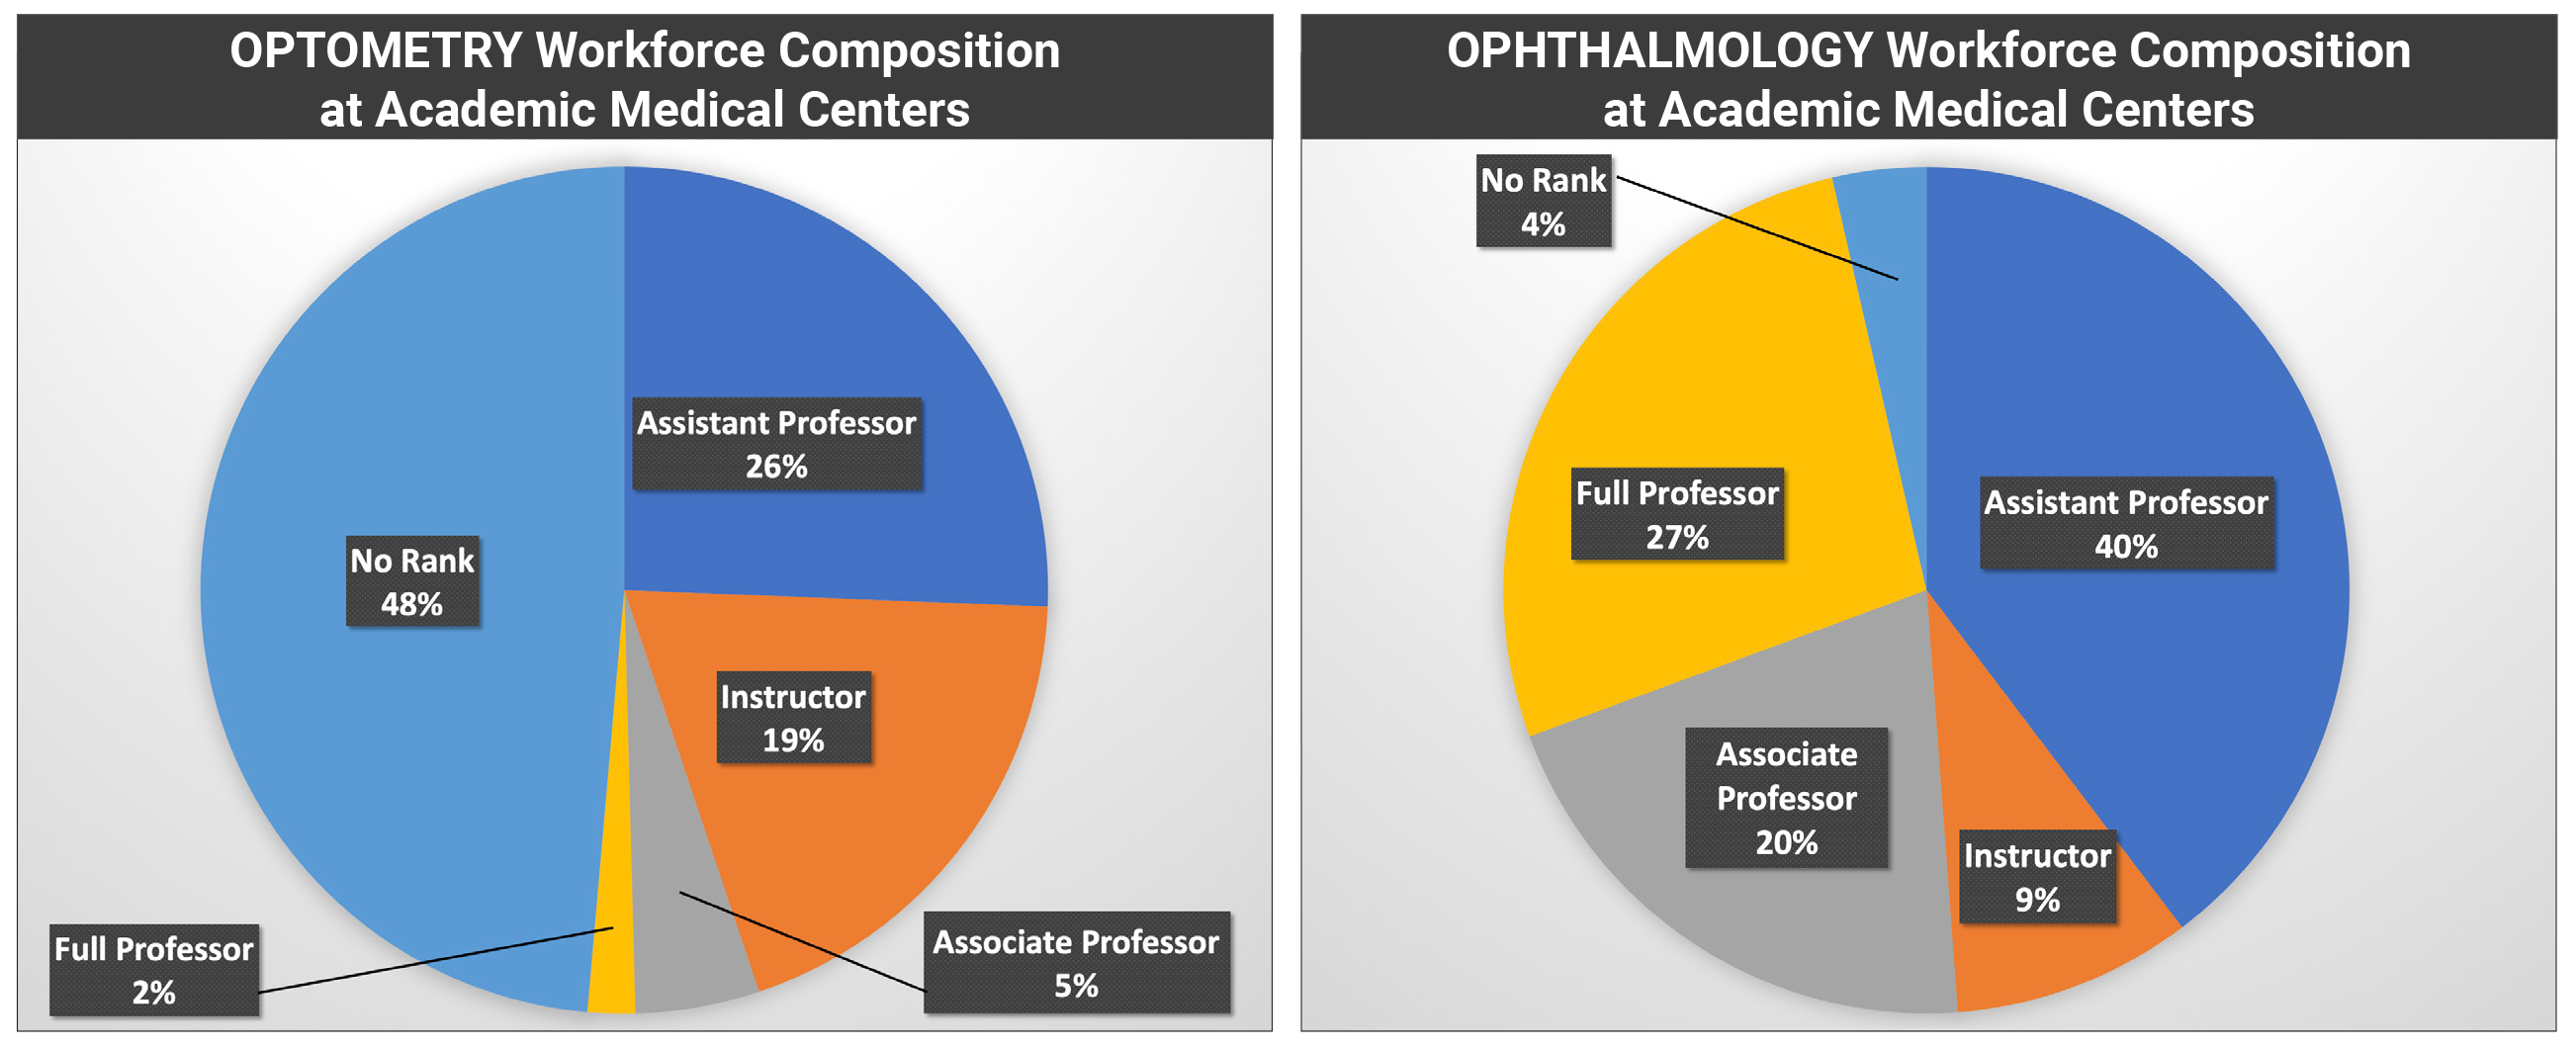 While ODs have access to promotion at many academic medical centers, the distribution of rank is skewed toward Instructor and Assistant Professor, rather than Associate Professor and Full Professor, when compared with MDs.